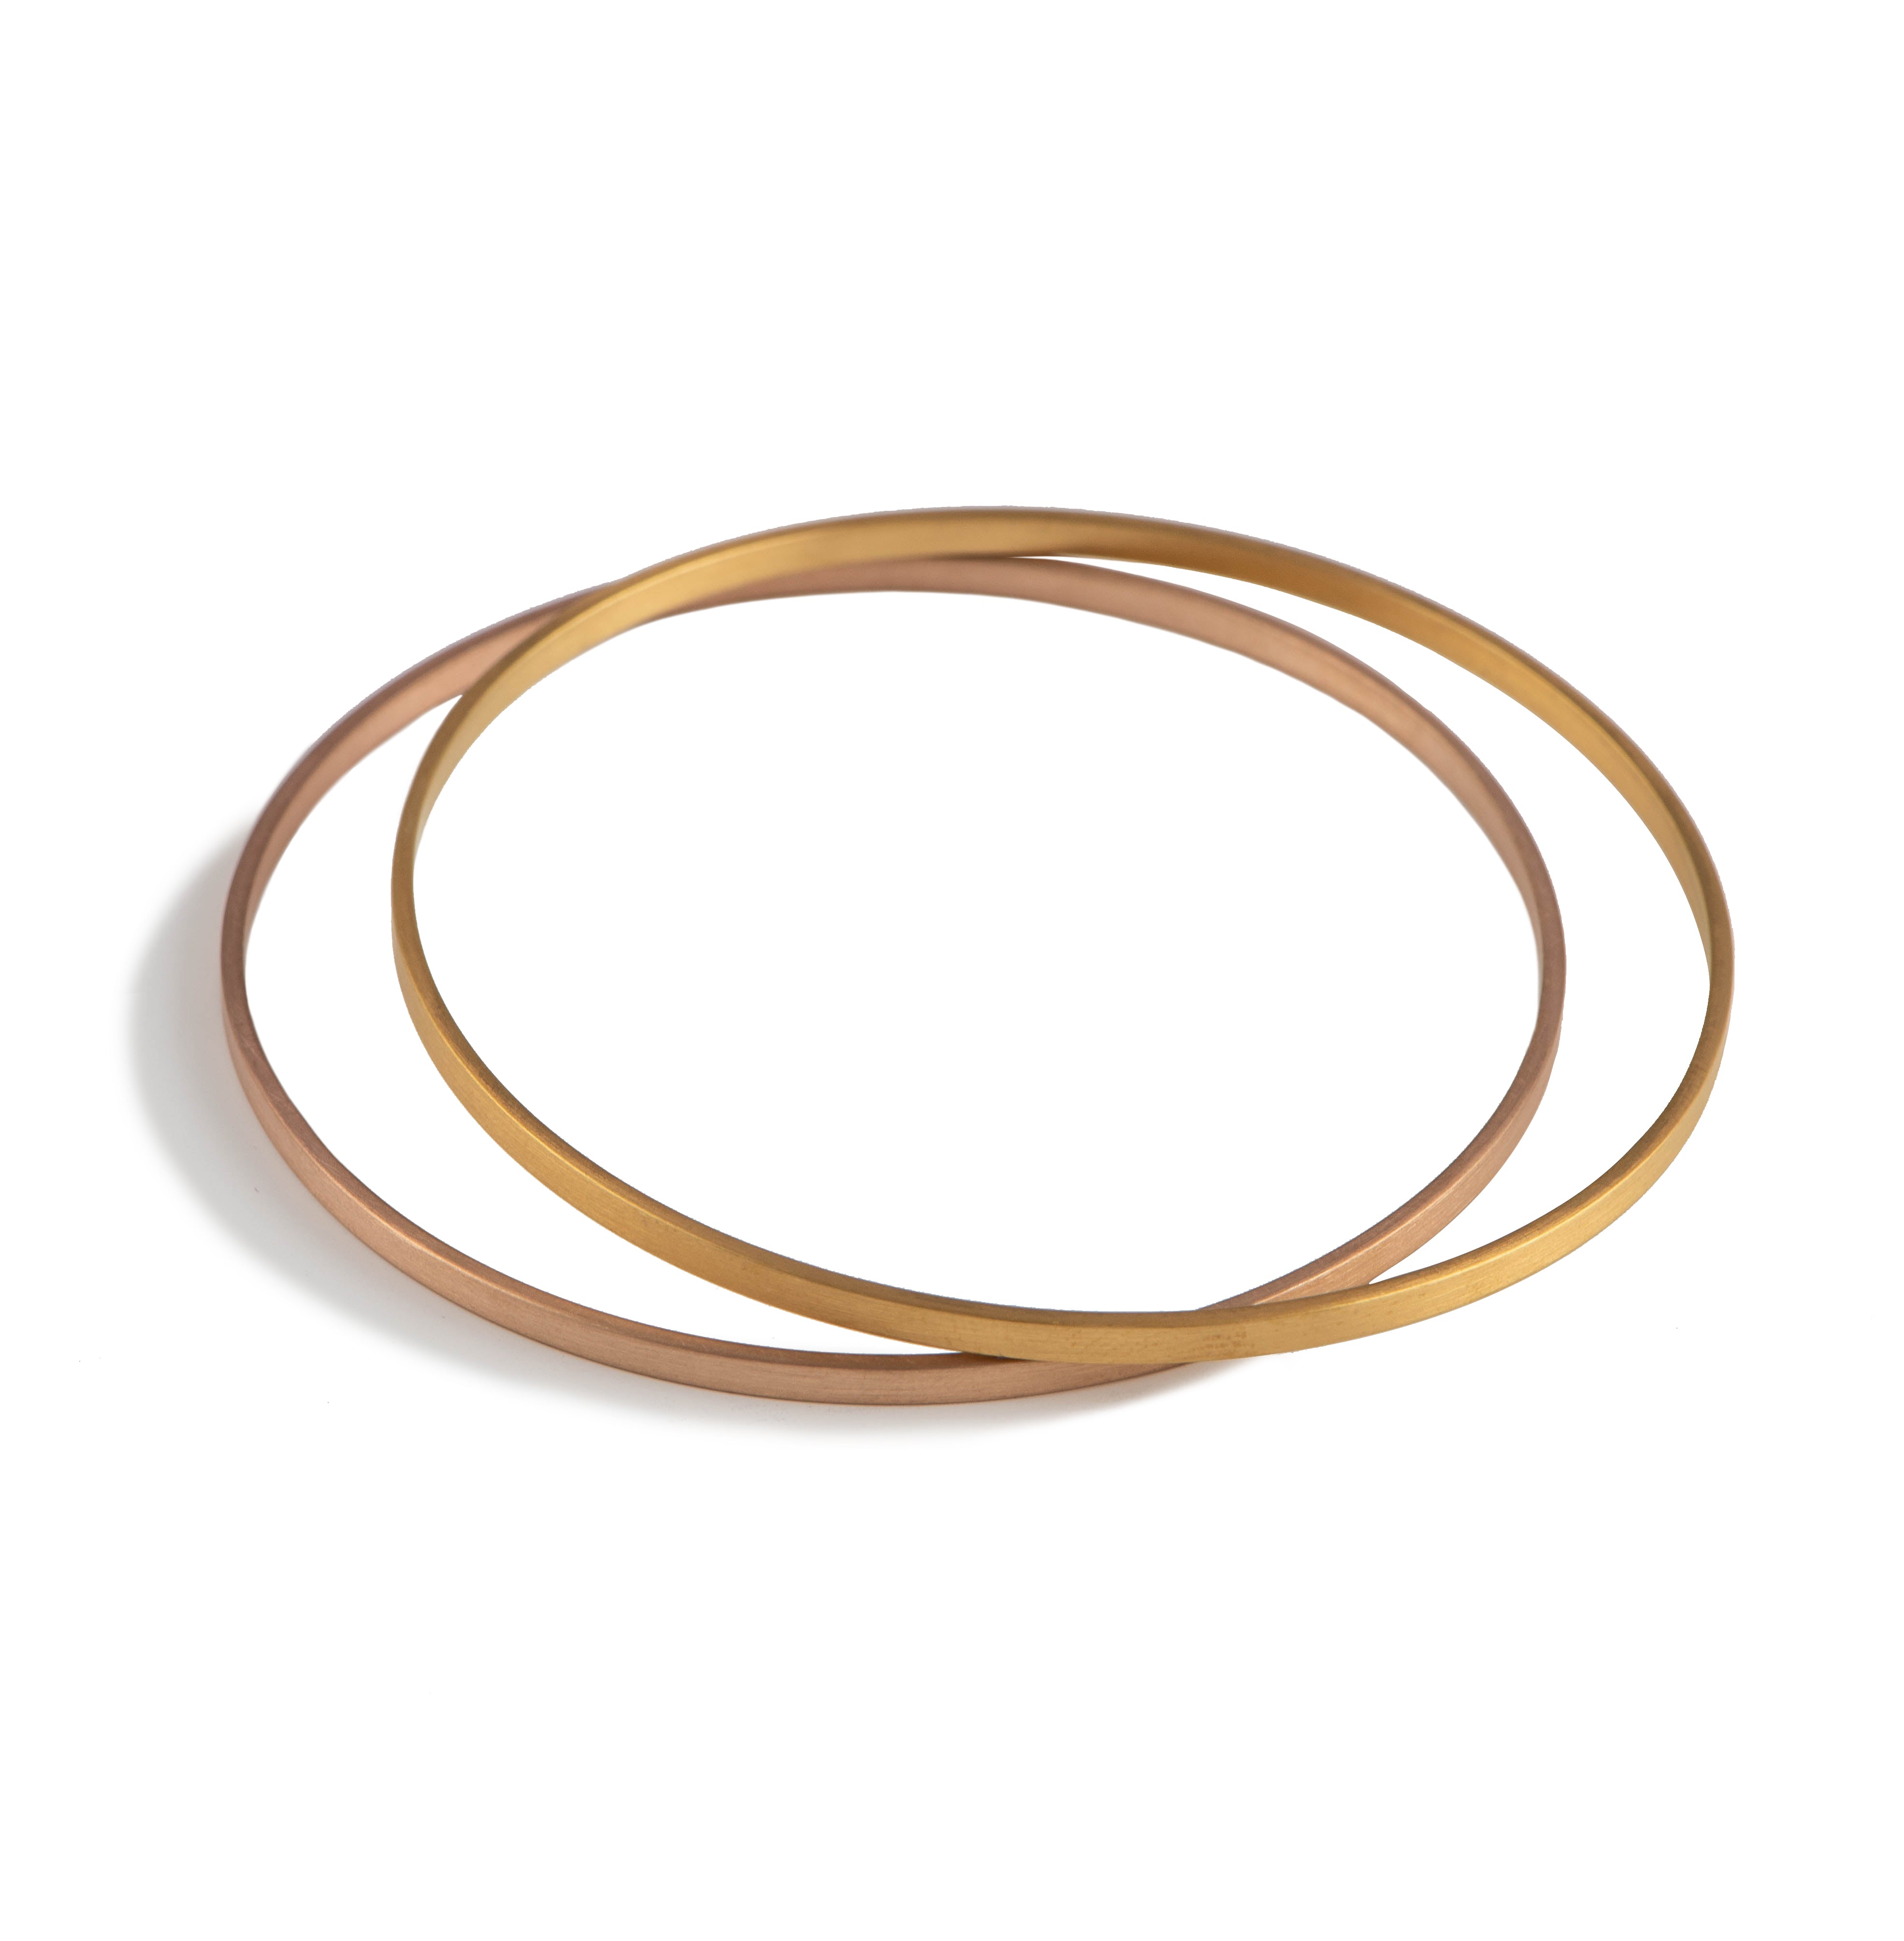 Sterling Silver Gold & Rose Plated Flat Round Bangles Brushed (Pair) - 1 Gold, 1 Rose Gold Plated